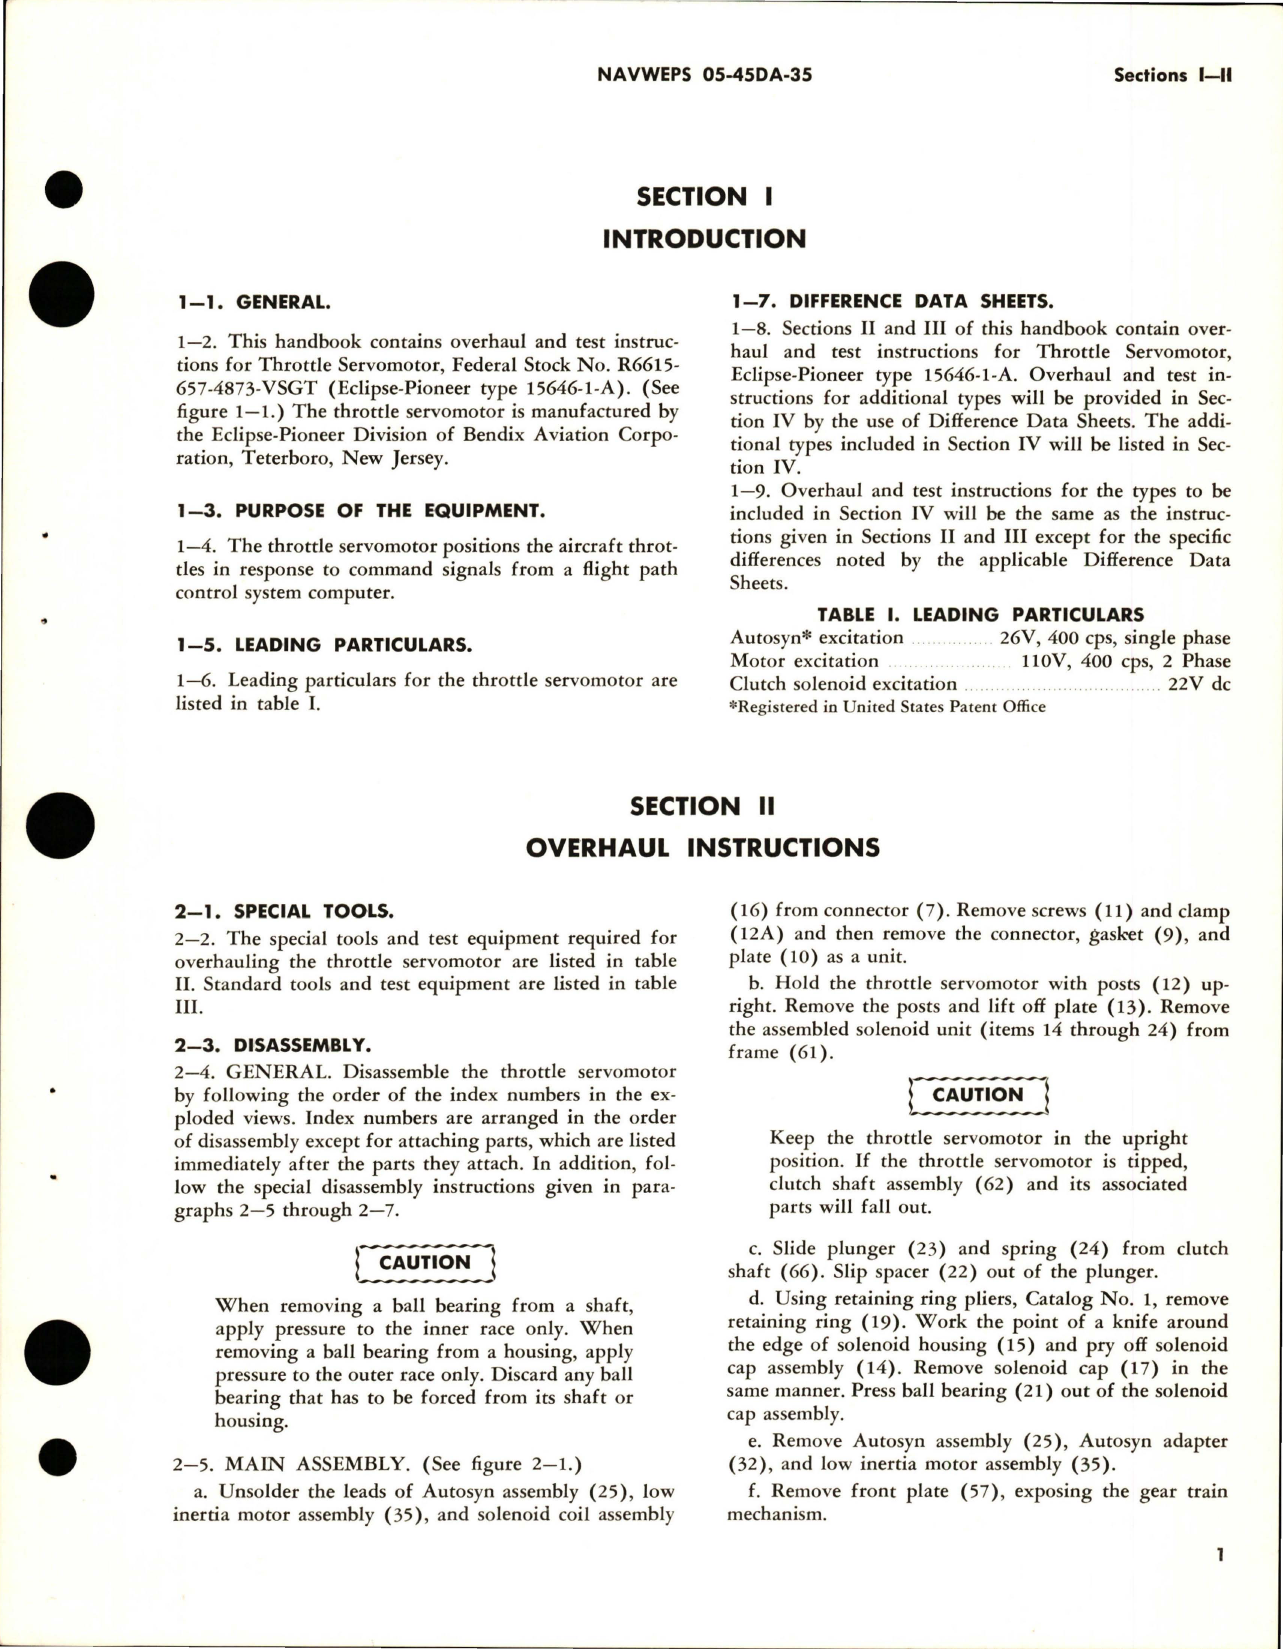 Sample page 5 from AirCorps Library document: Overhaul Instructions for Throttle Servomotor - Type 15646-1-A